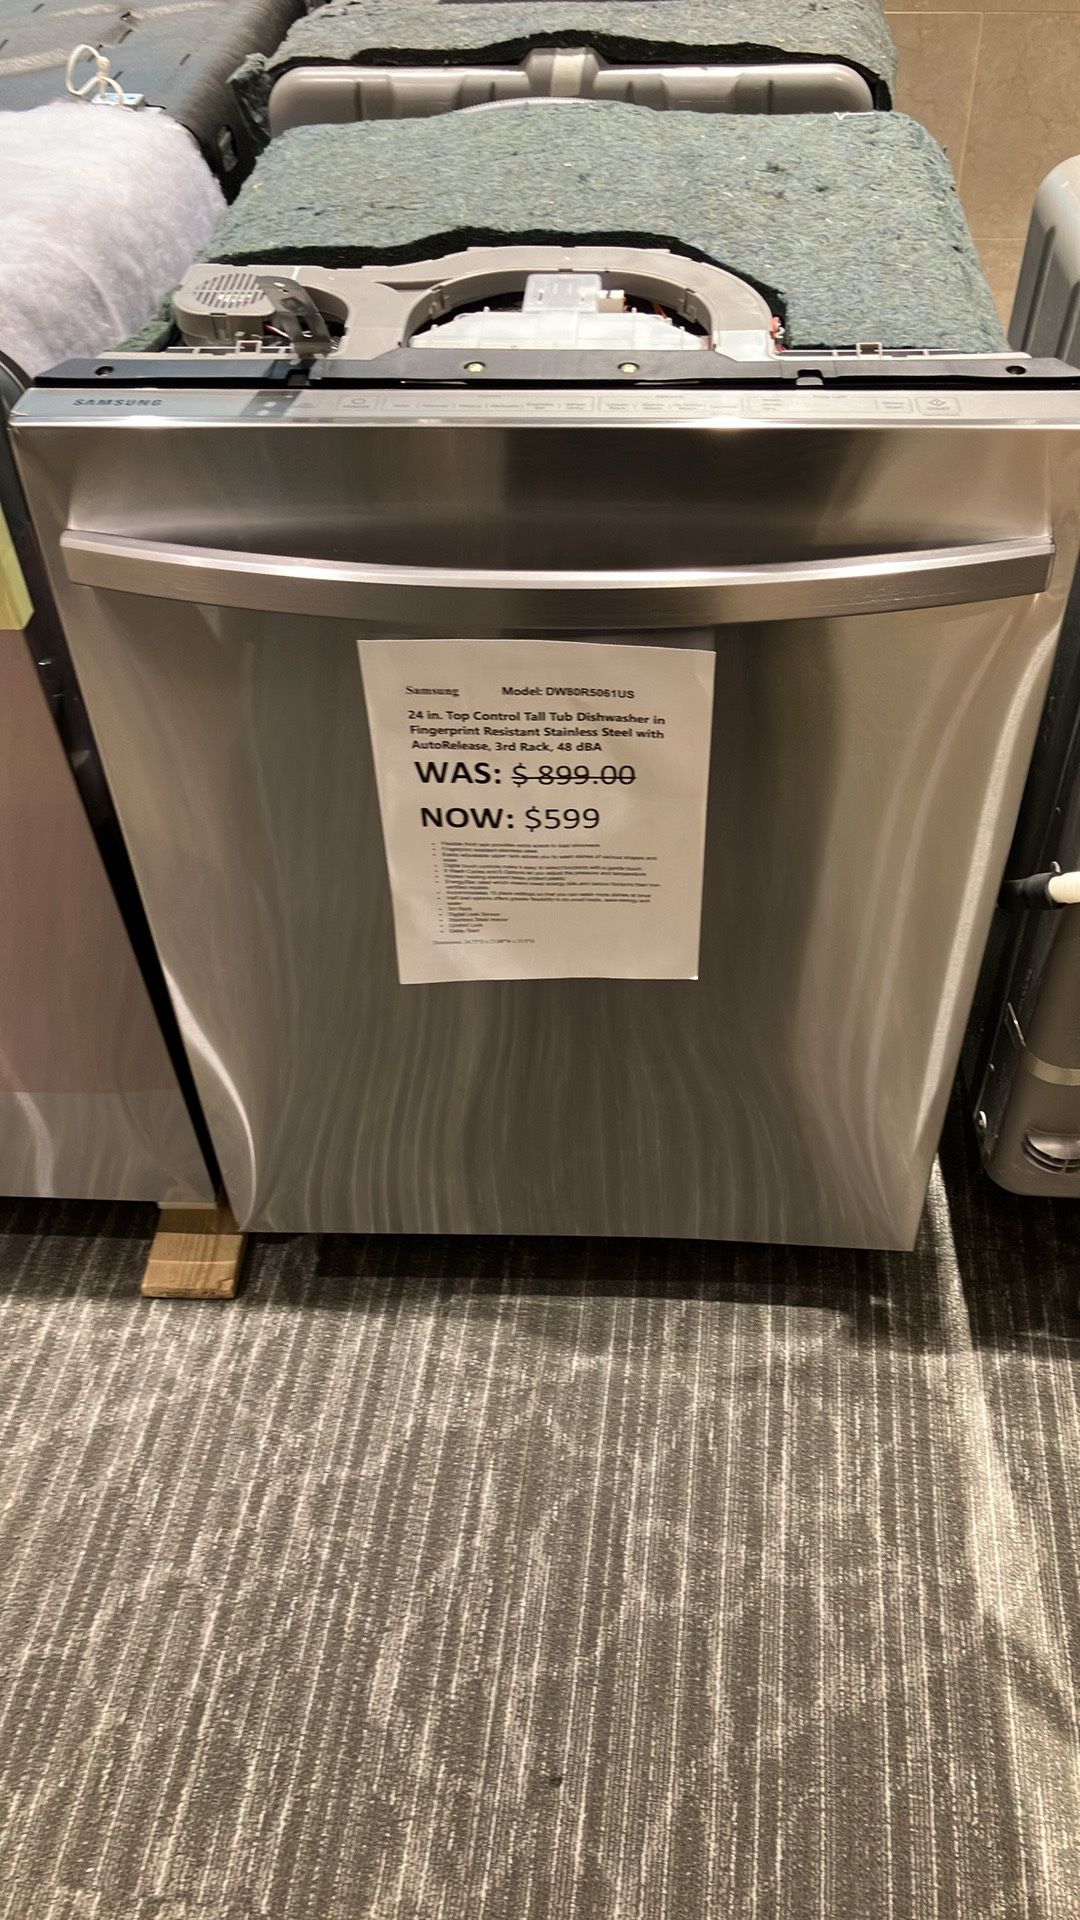 24 in. Top Control Tall Tub Dishwasher in Fingerprint Resistant Stainless Steel with AutoRelease, 3rd Rack, 39 dBA -Retail $729